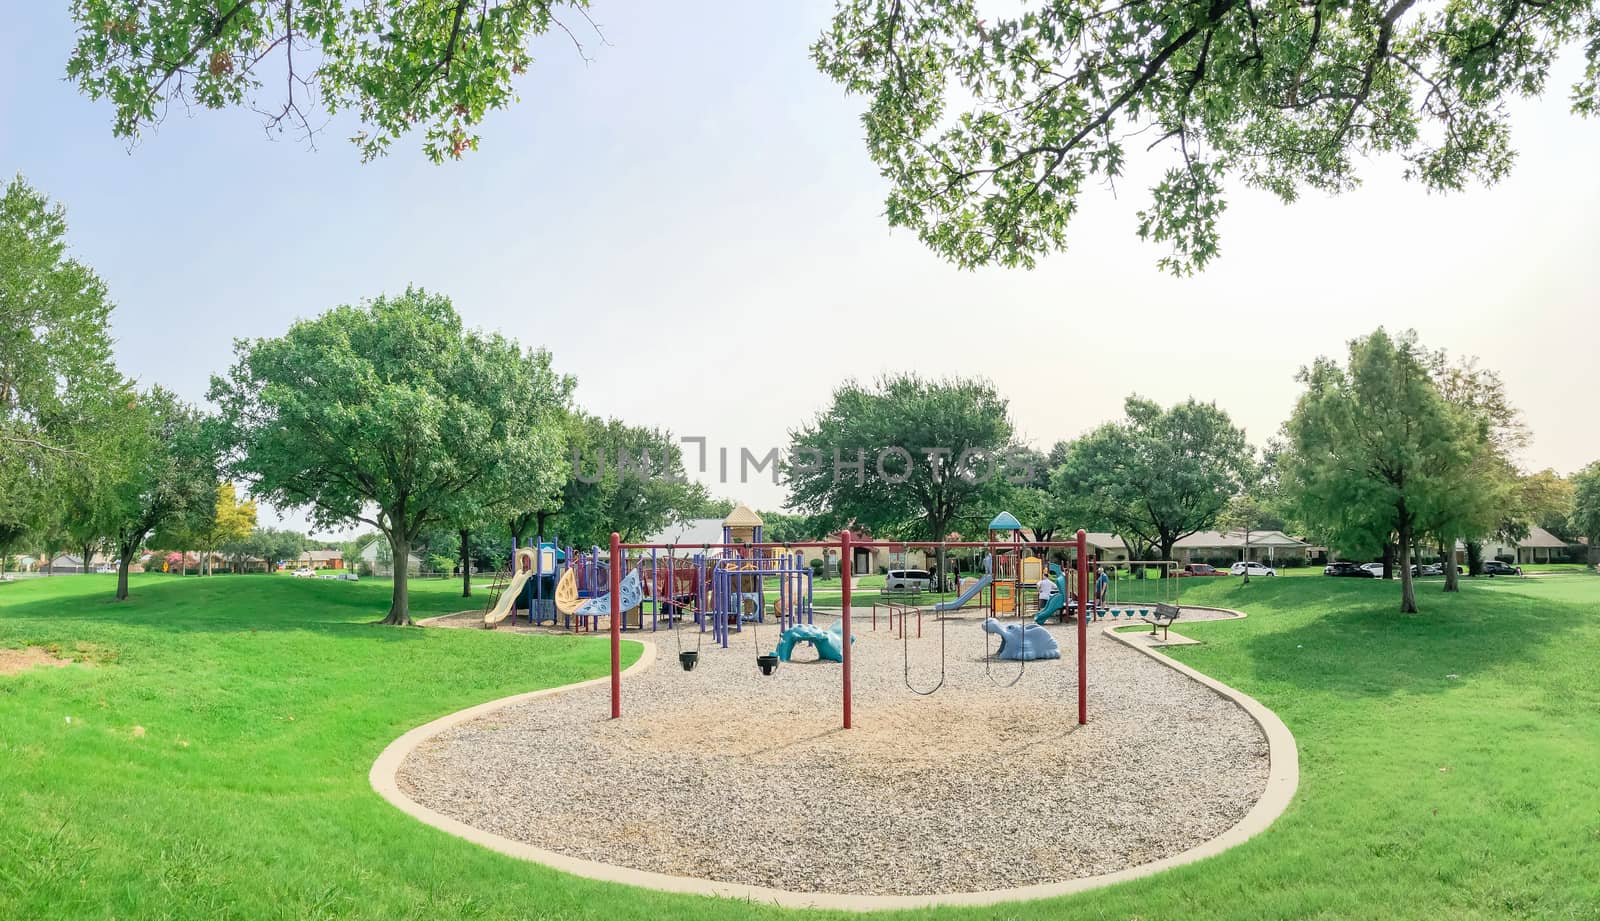 Panorama view colorful playground near residential neighborhood in Richardson, Texas, America. Community facility surrounded by large oak trees and green grass lawn